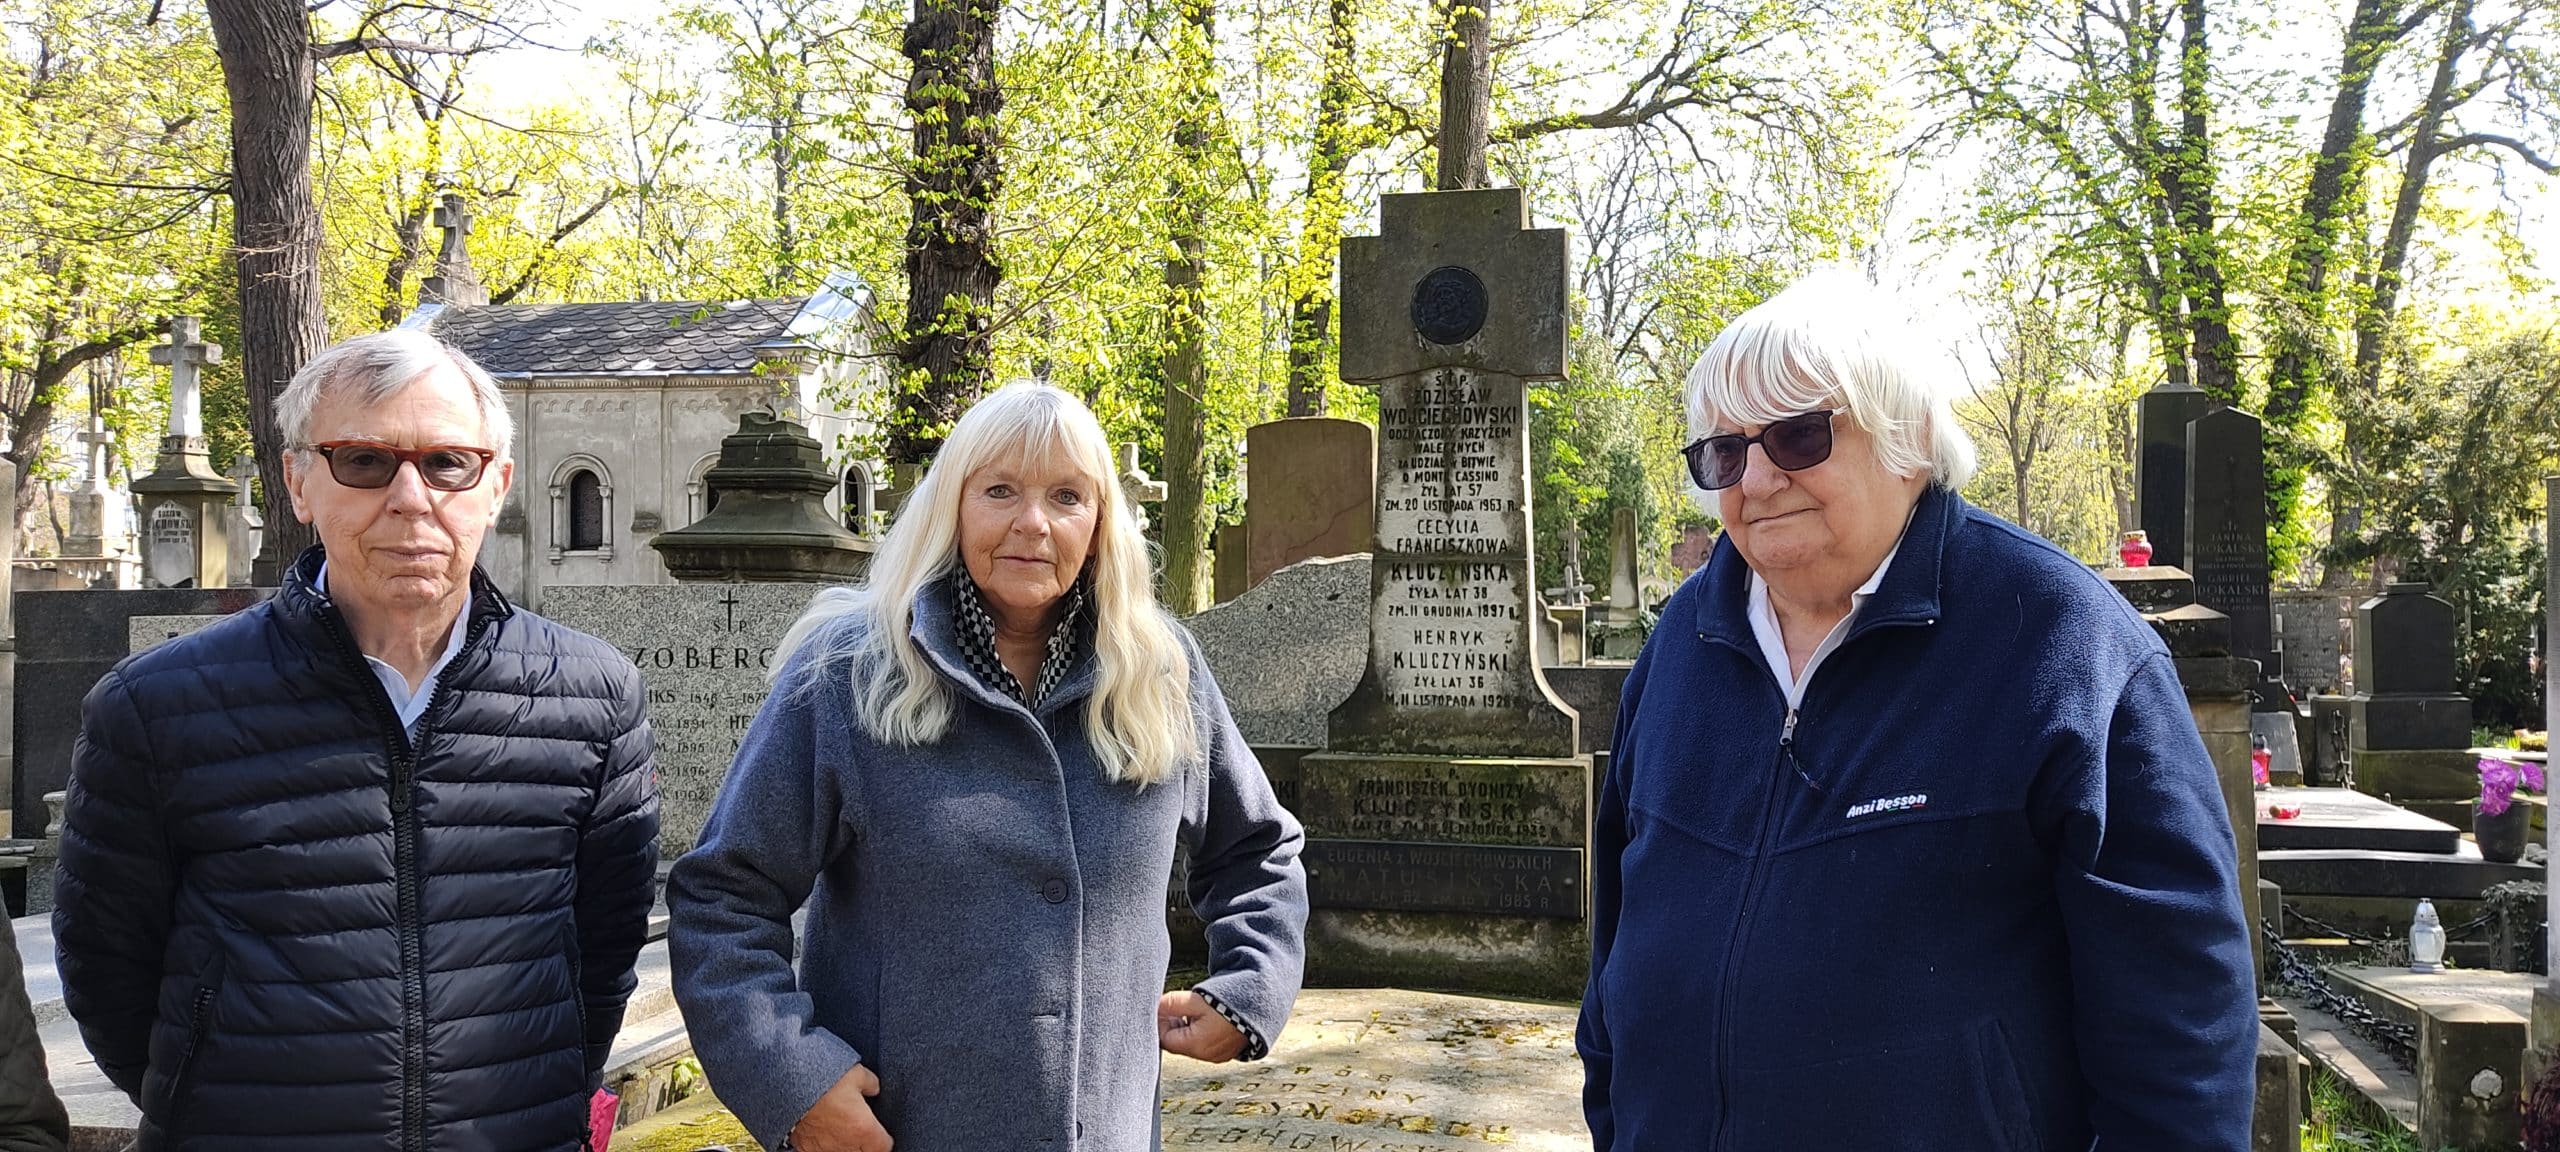 Two women and a man standing by a headstone